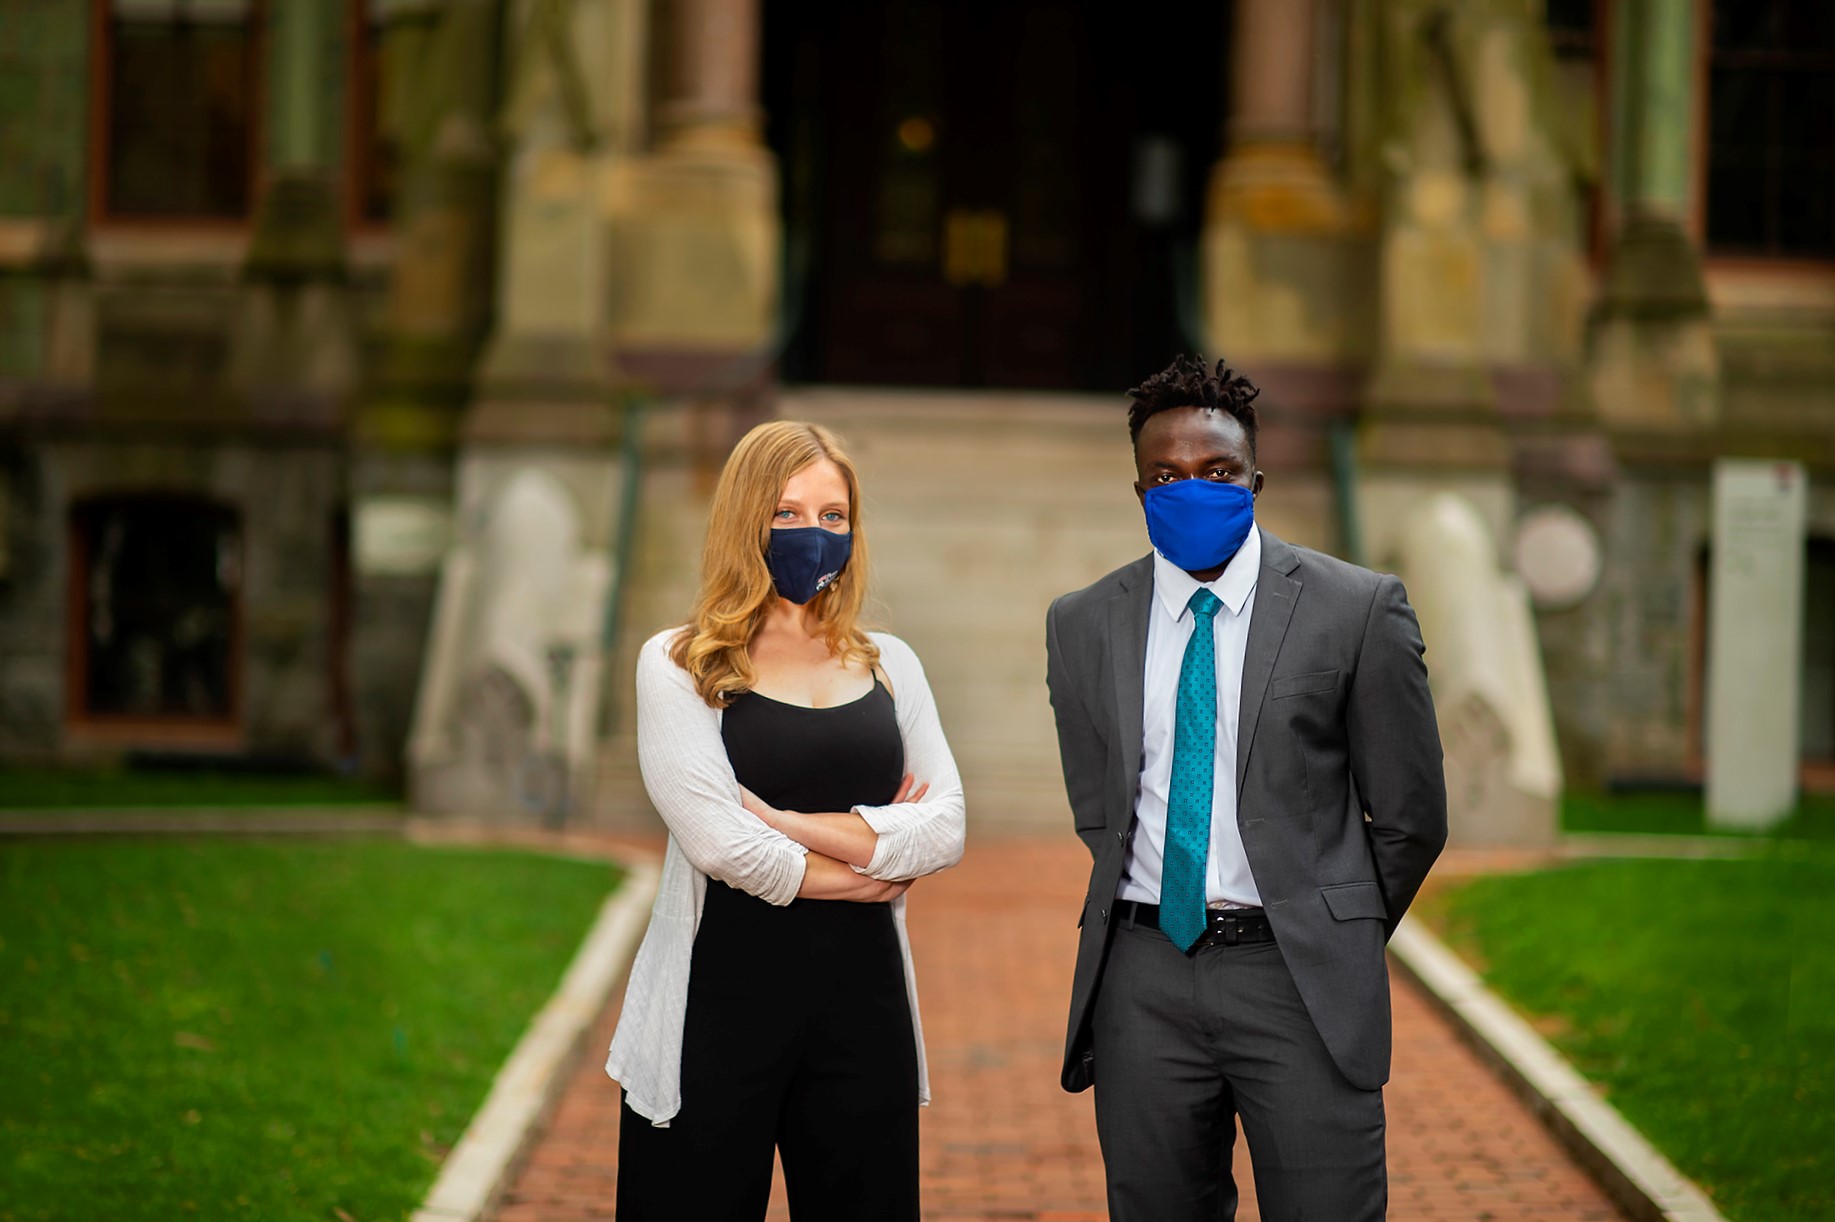 Leah Voytovich and Martin Leet in front of college hall while wearing masks